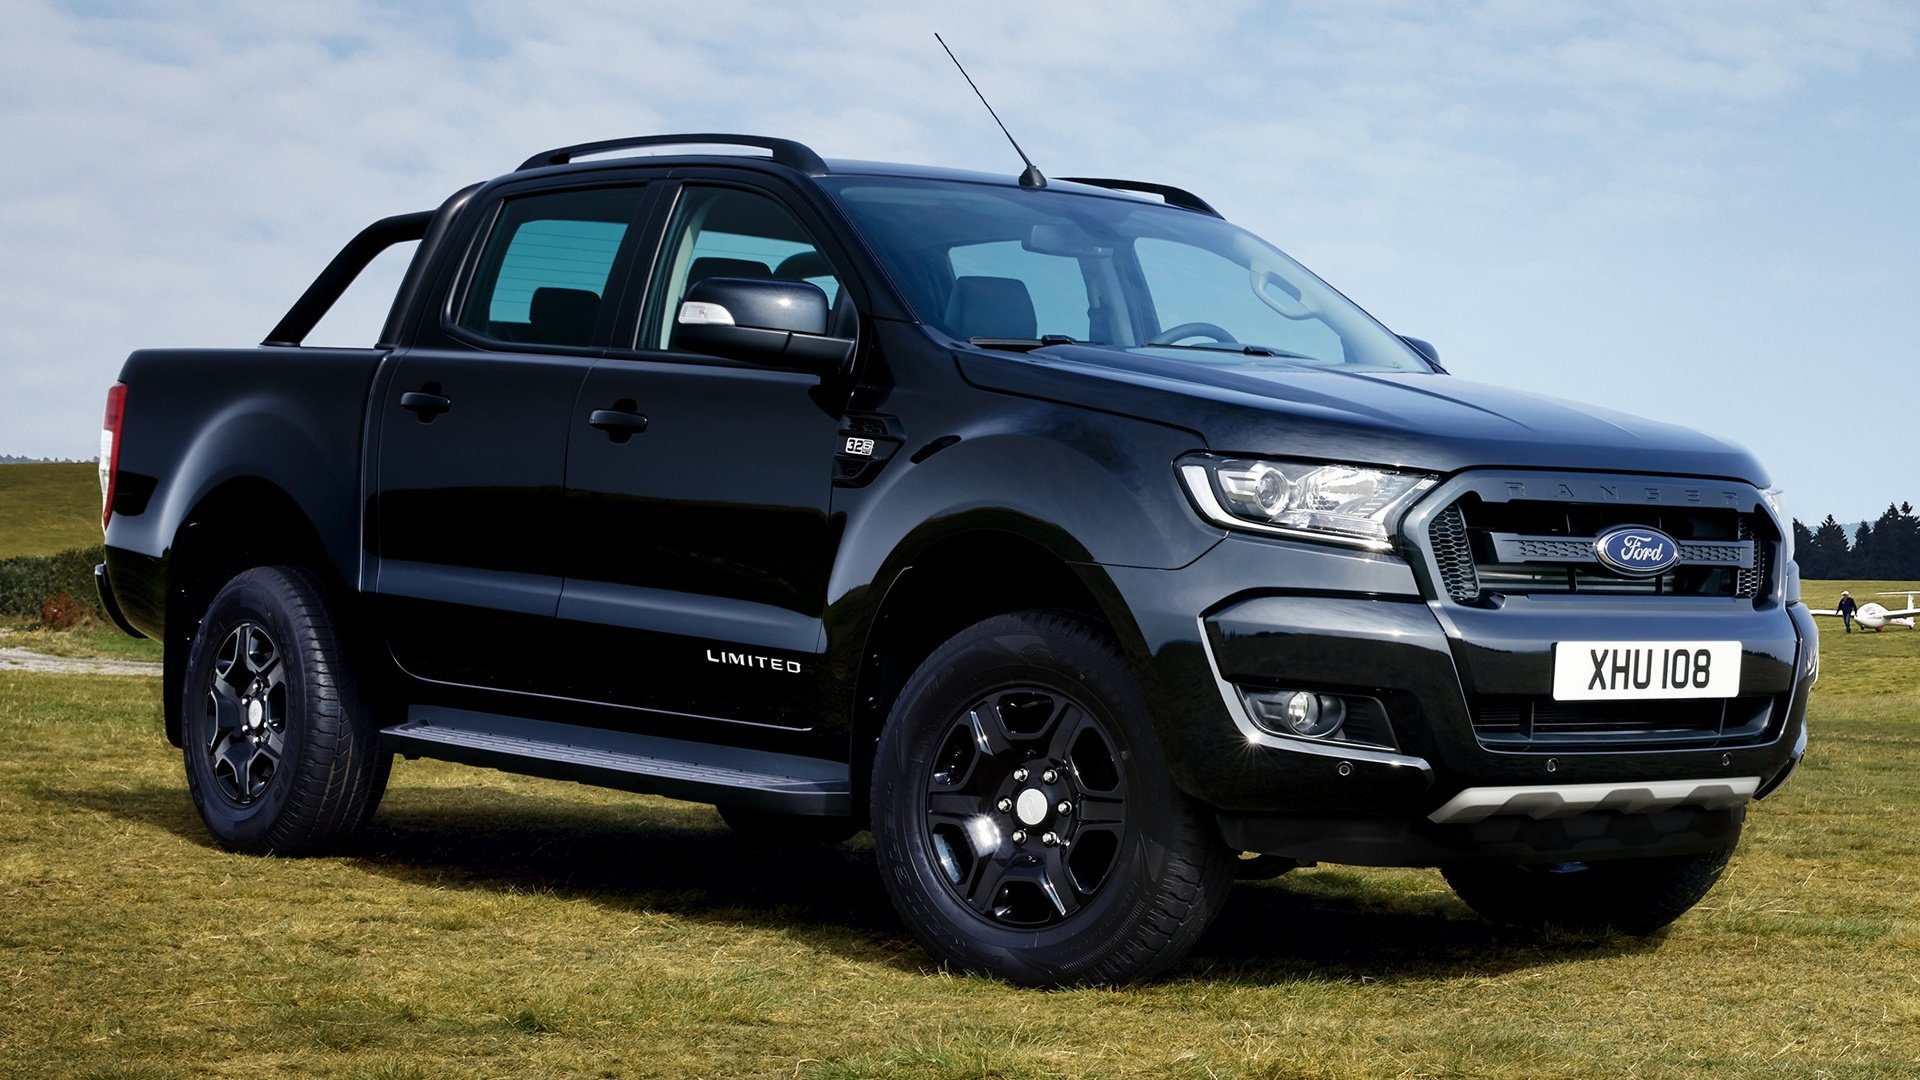 Ford Ranger: The final North American-market car was produced on December 16, 2011. 1920x1080 Full HD Wallpaper.